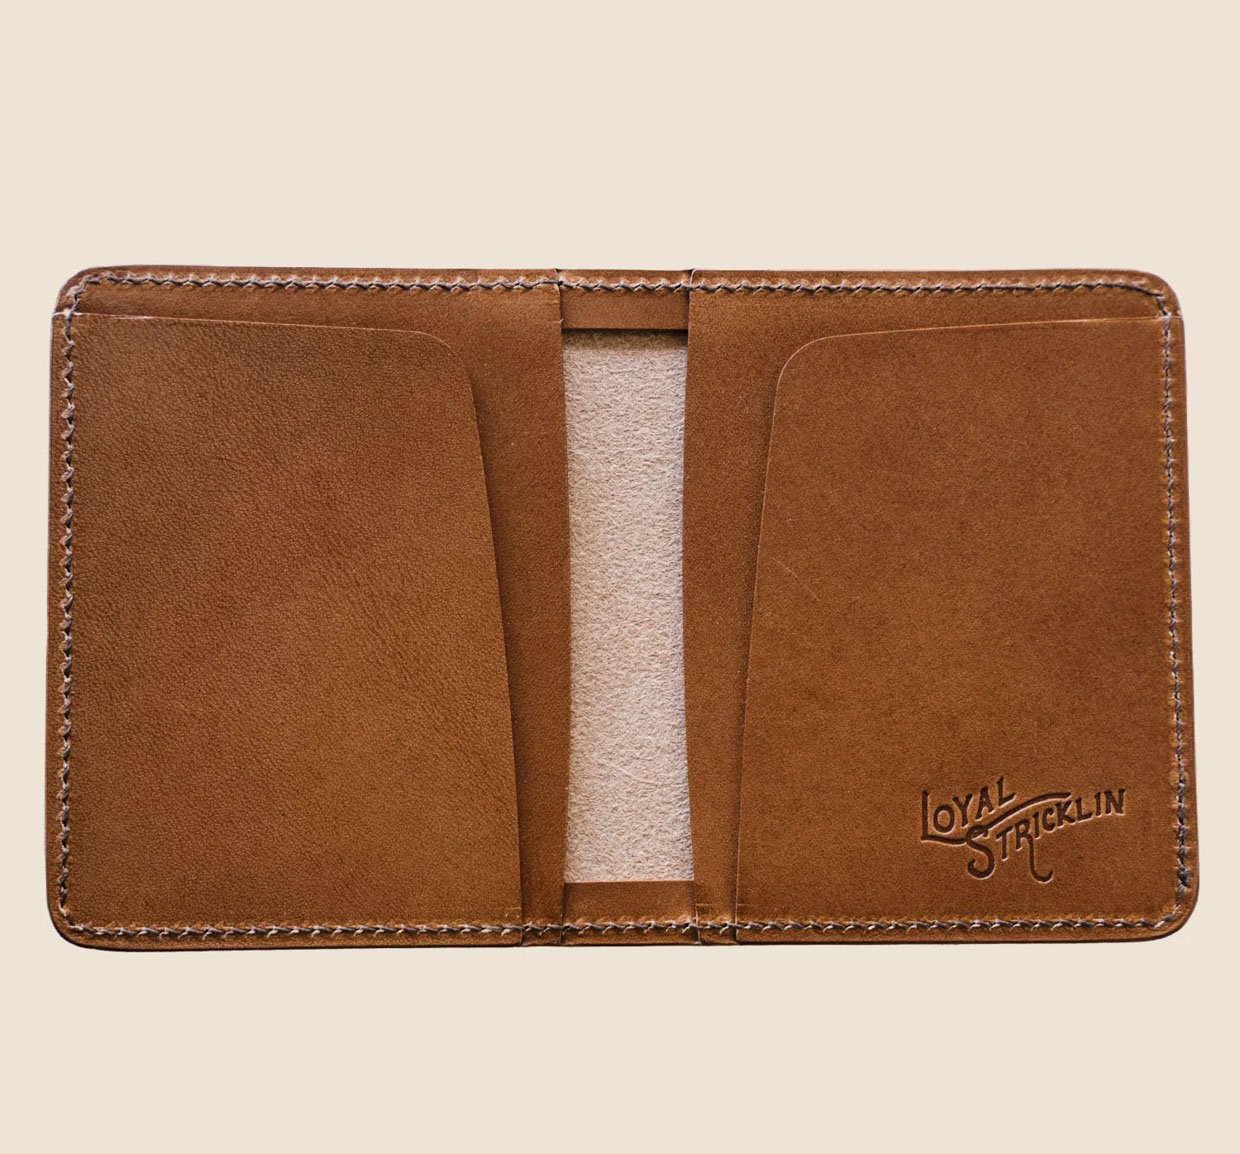 Loyal Stricklin Miles Bifold Wallet Is Just the Right Size